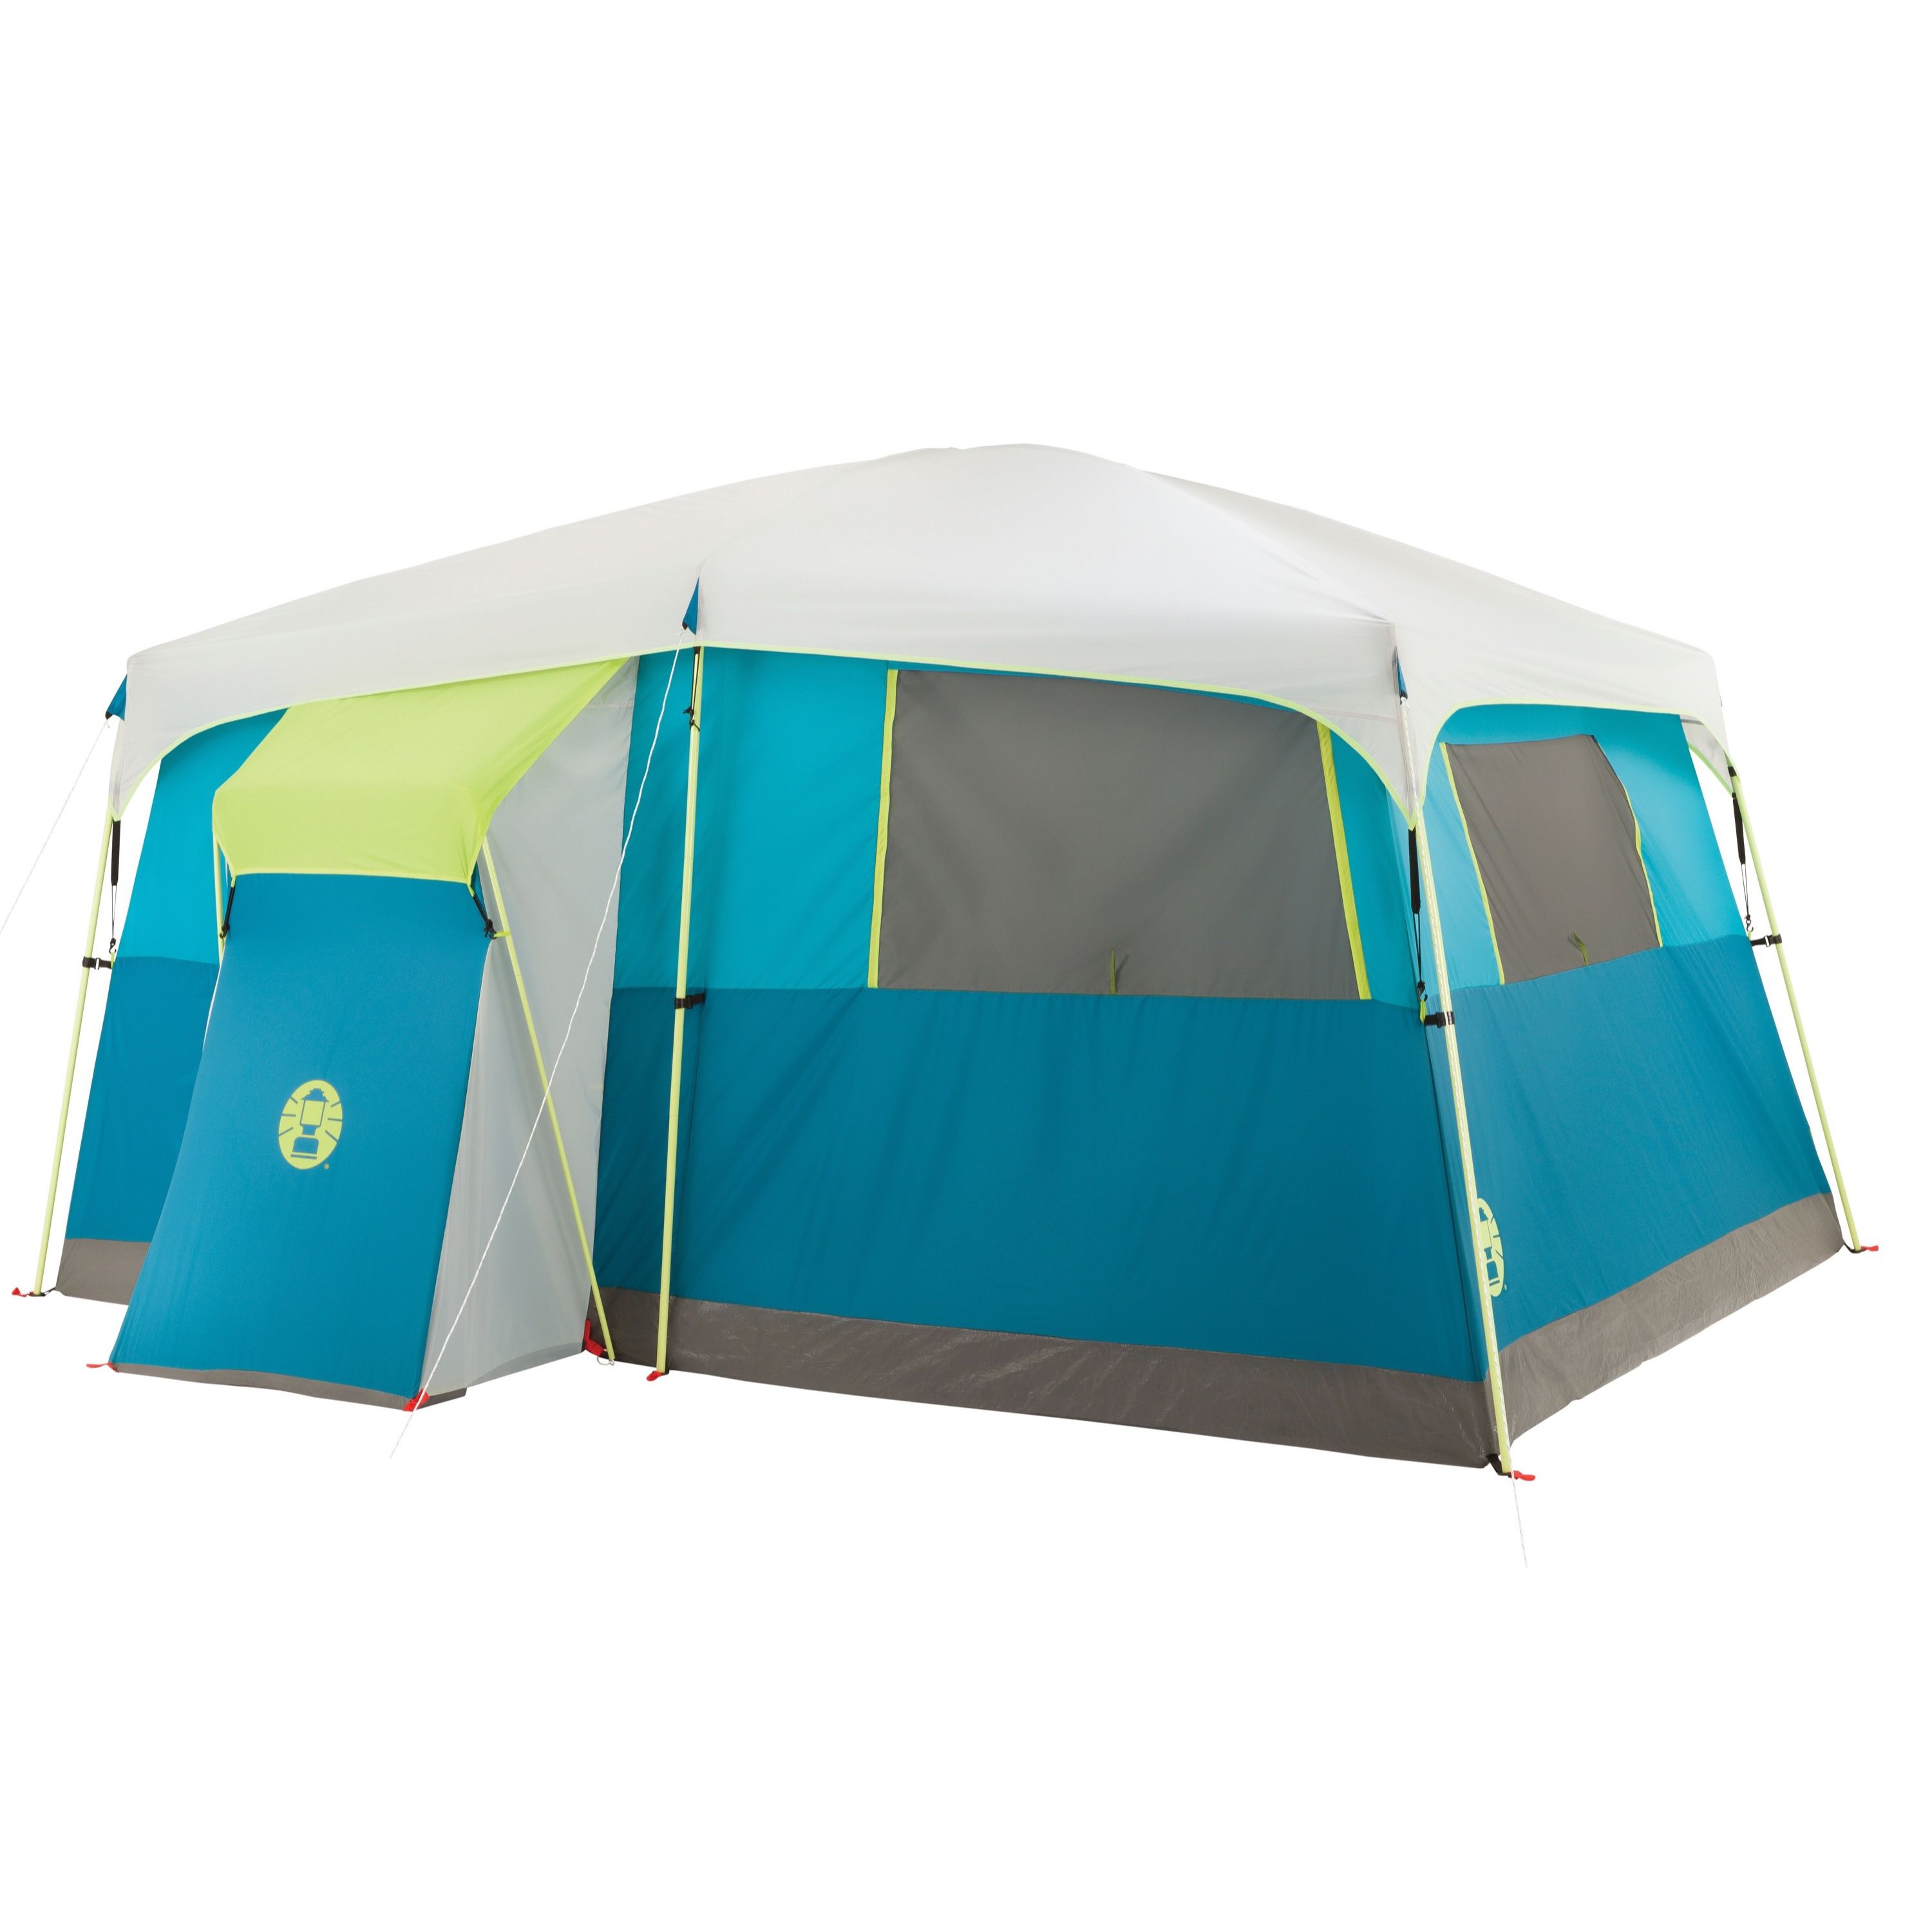 Coleman® 8-Person Tenaya Lake™ Fast Pitch™ Cabin Camping Tent with Closet, Light Blue - image 4 of 11